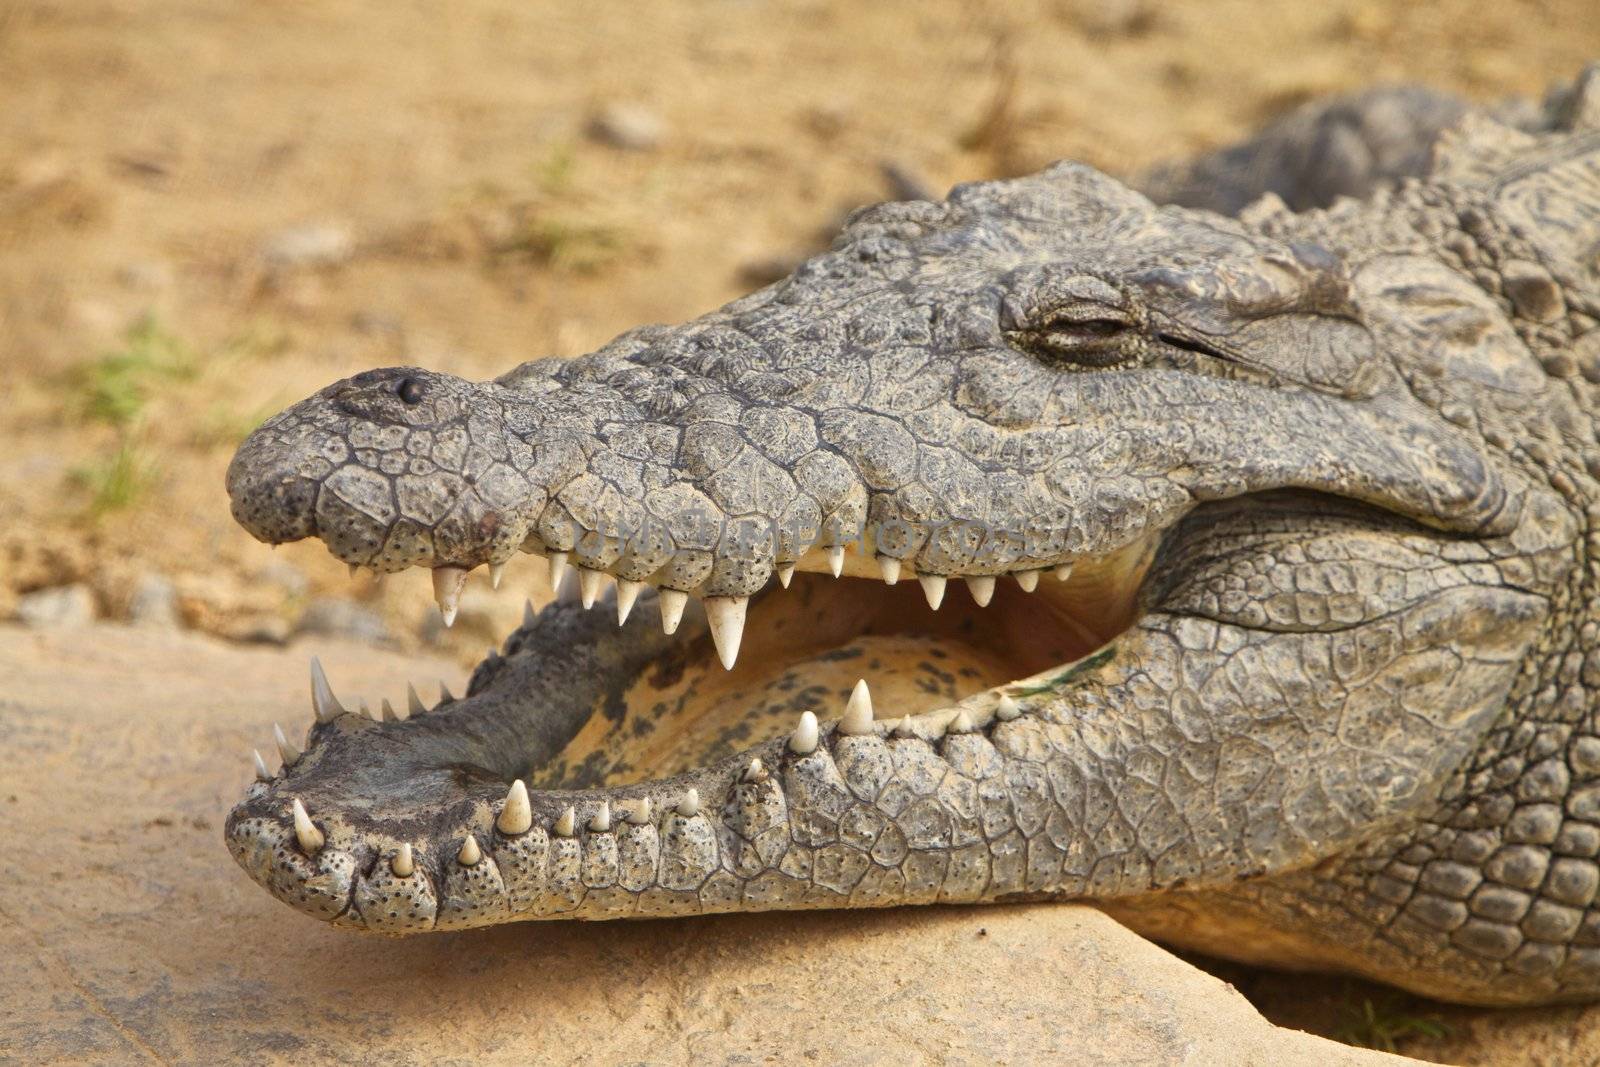 African crocodile, close up view